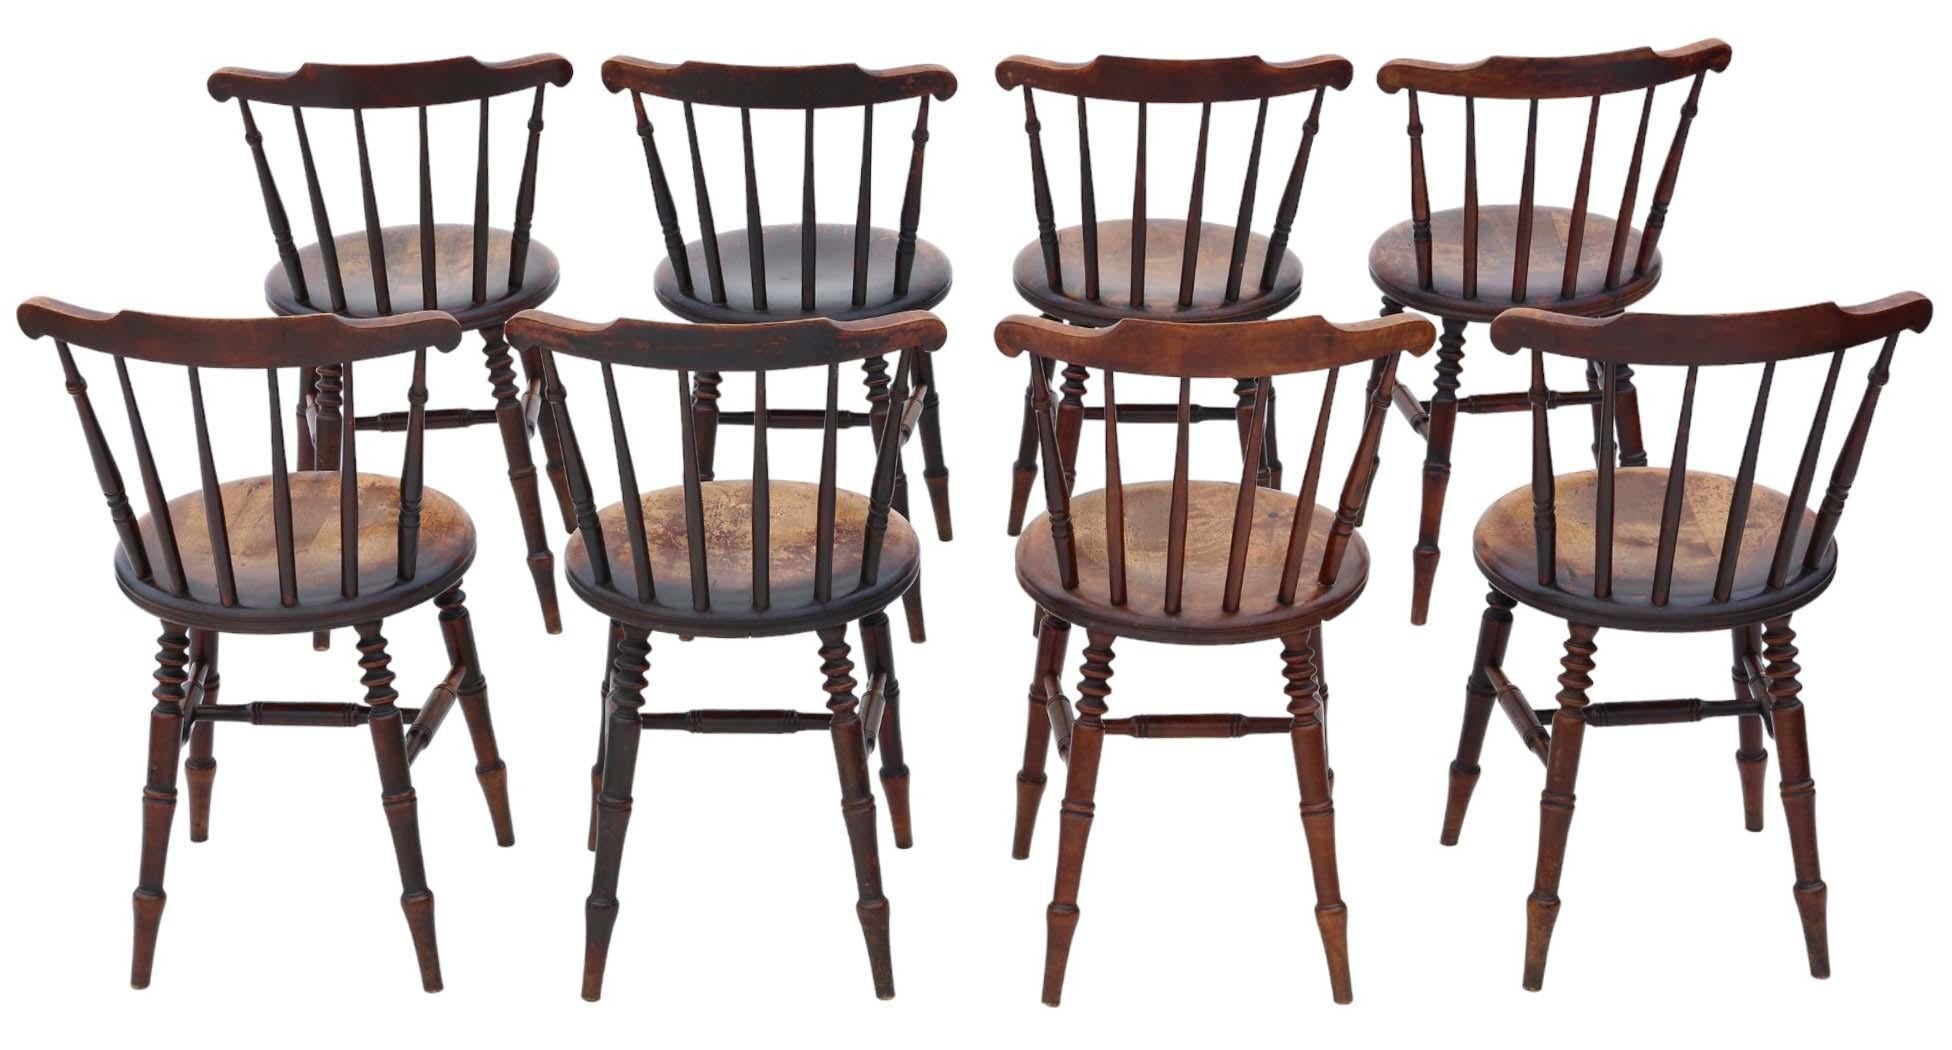 Antique high-quality set of 8 Ibex penny Windsor kitchen dining chairs from around 1900.

These chairs feature a sturdy construction with robust joints and are free from woodworm damage.

Exhibiting the finest age color and patina.

Overall